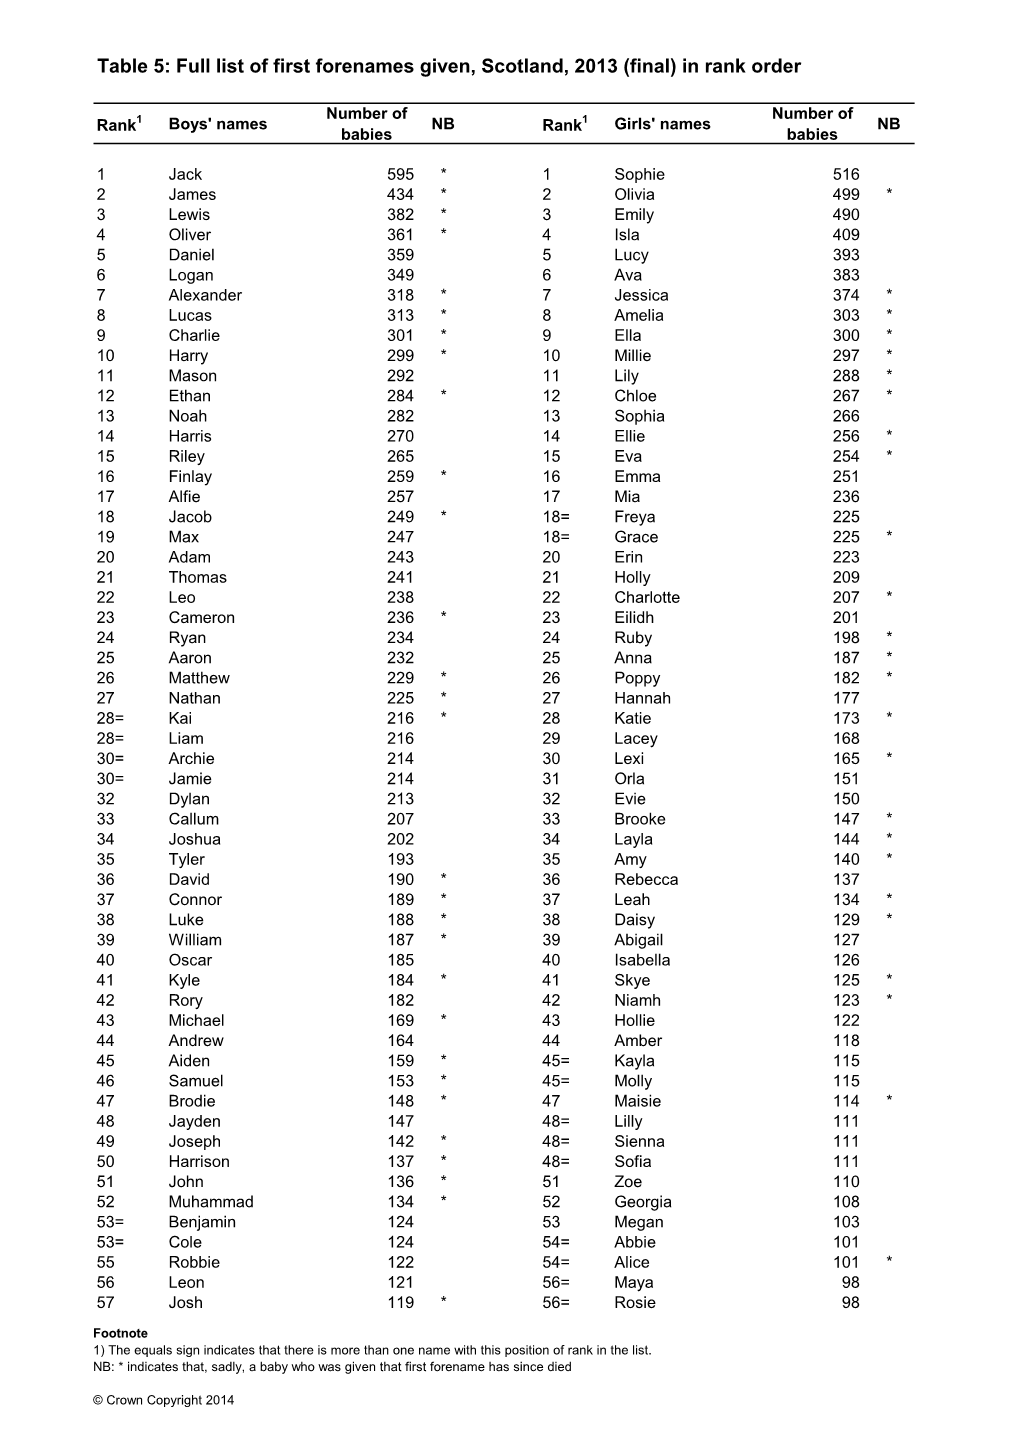 Full List of First Forenames Given, Scotland, 2013 (Final) in Rank Order